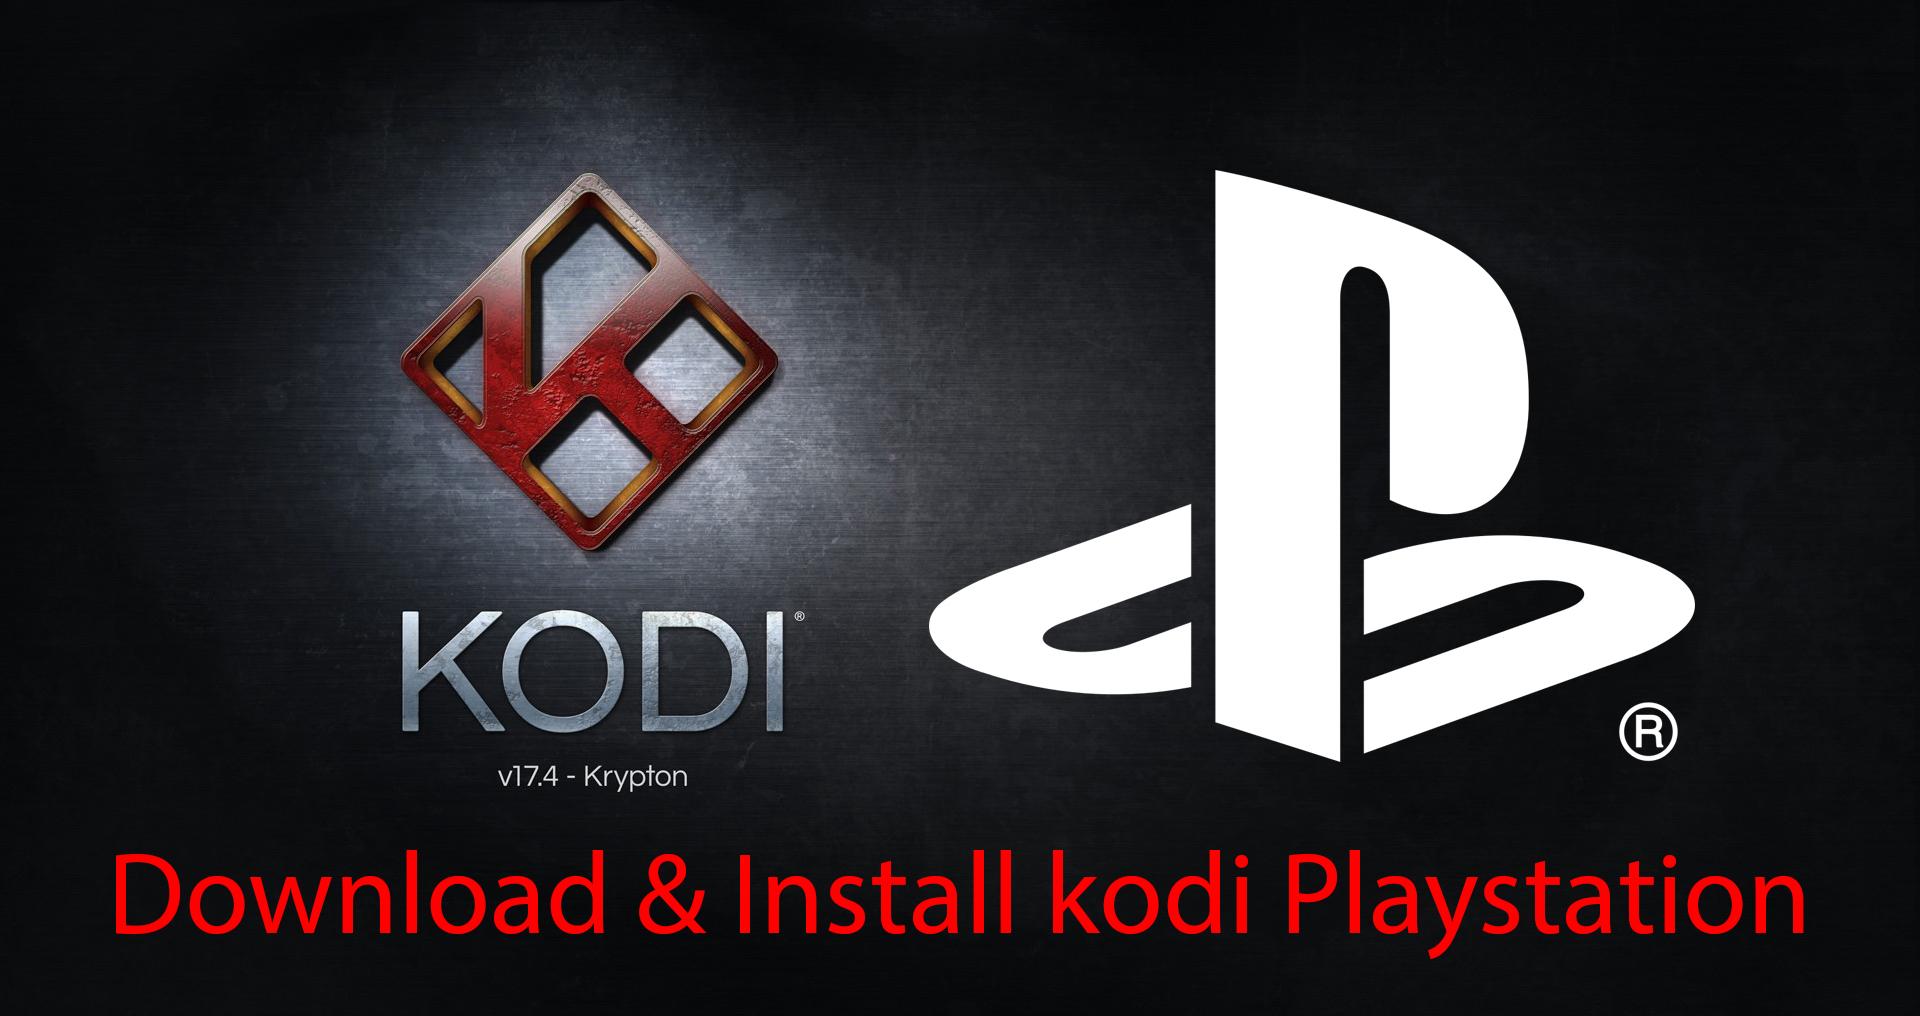 How to easily Download & Install [kodi on PS3 & PS4] Playstation